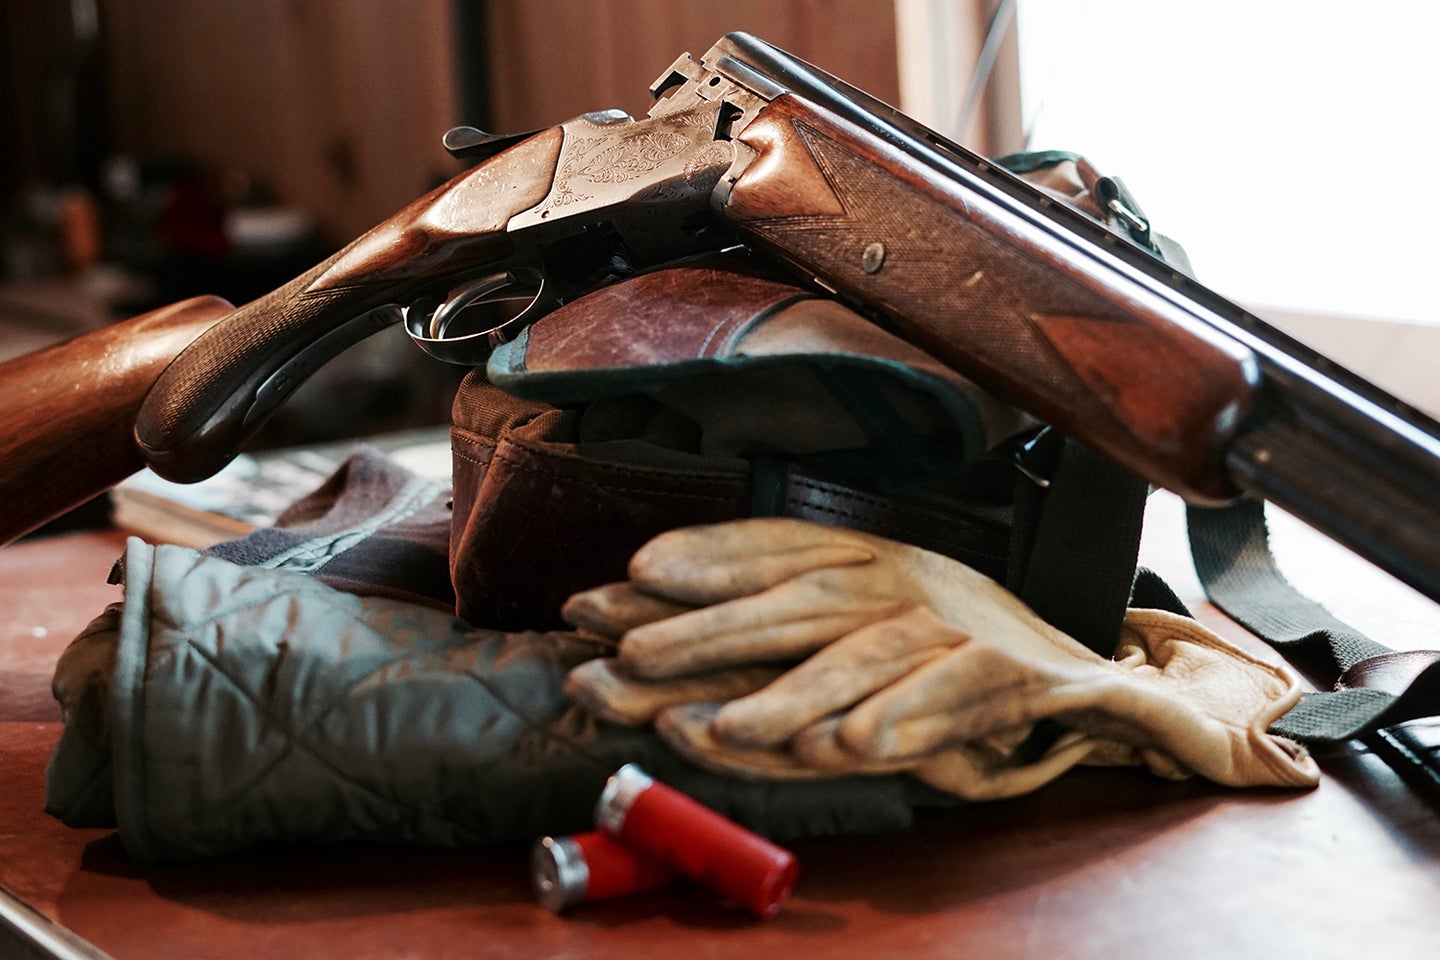 A Browning shotgun and hunting gear on a table.